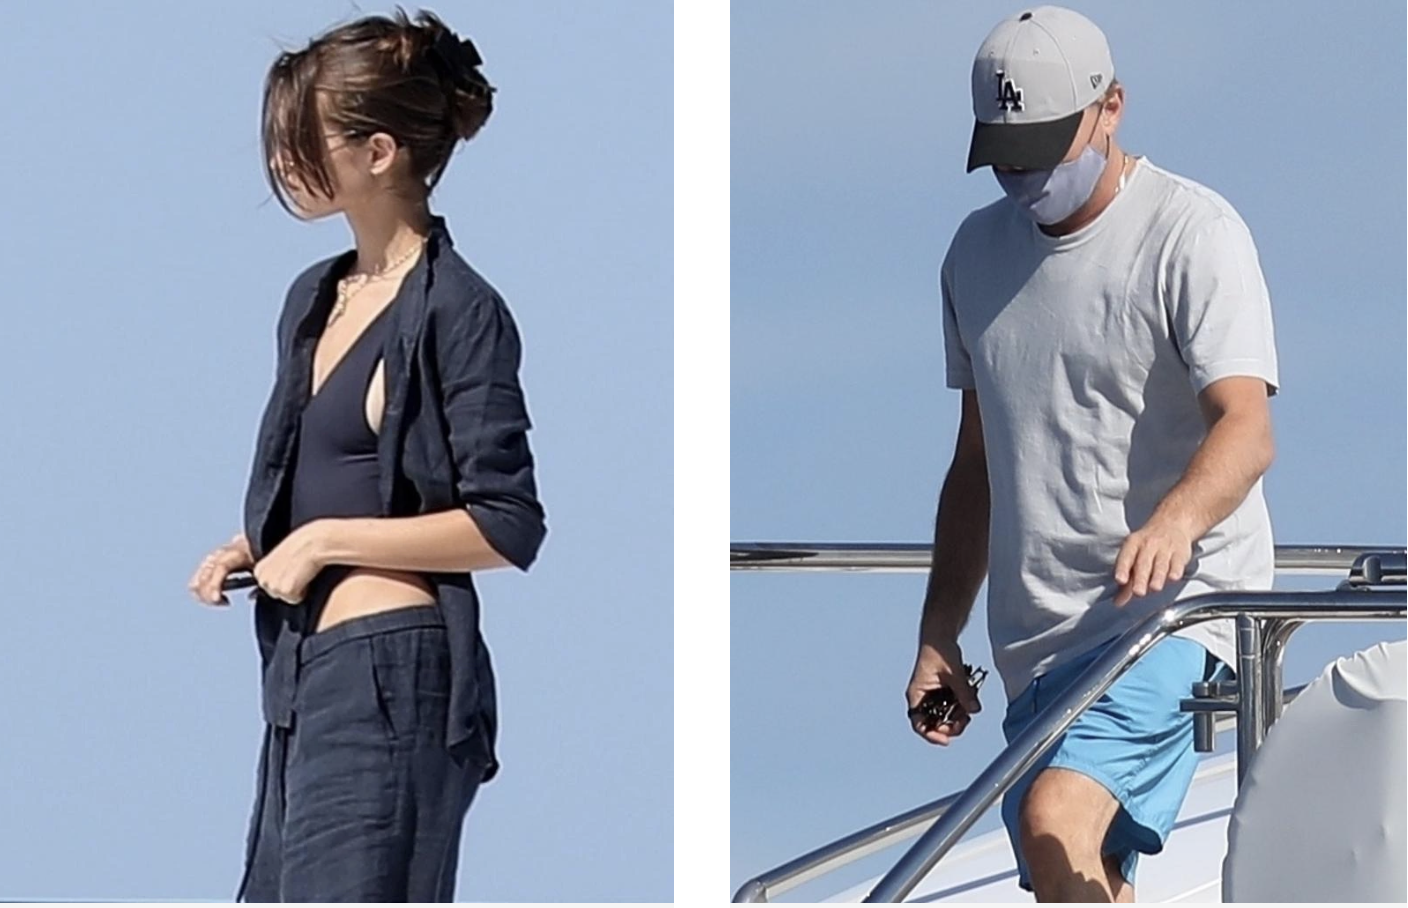 Meghan was spotted on the boat too! Source: Backgrid Leo was prancing around the boat. Source: BACKGRID Leo was prancing around the boat. Source: BACKGRID